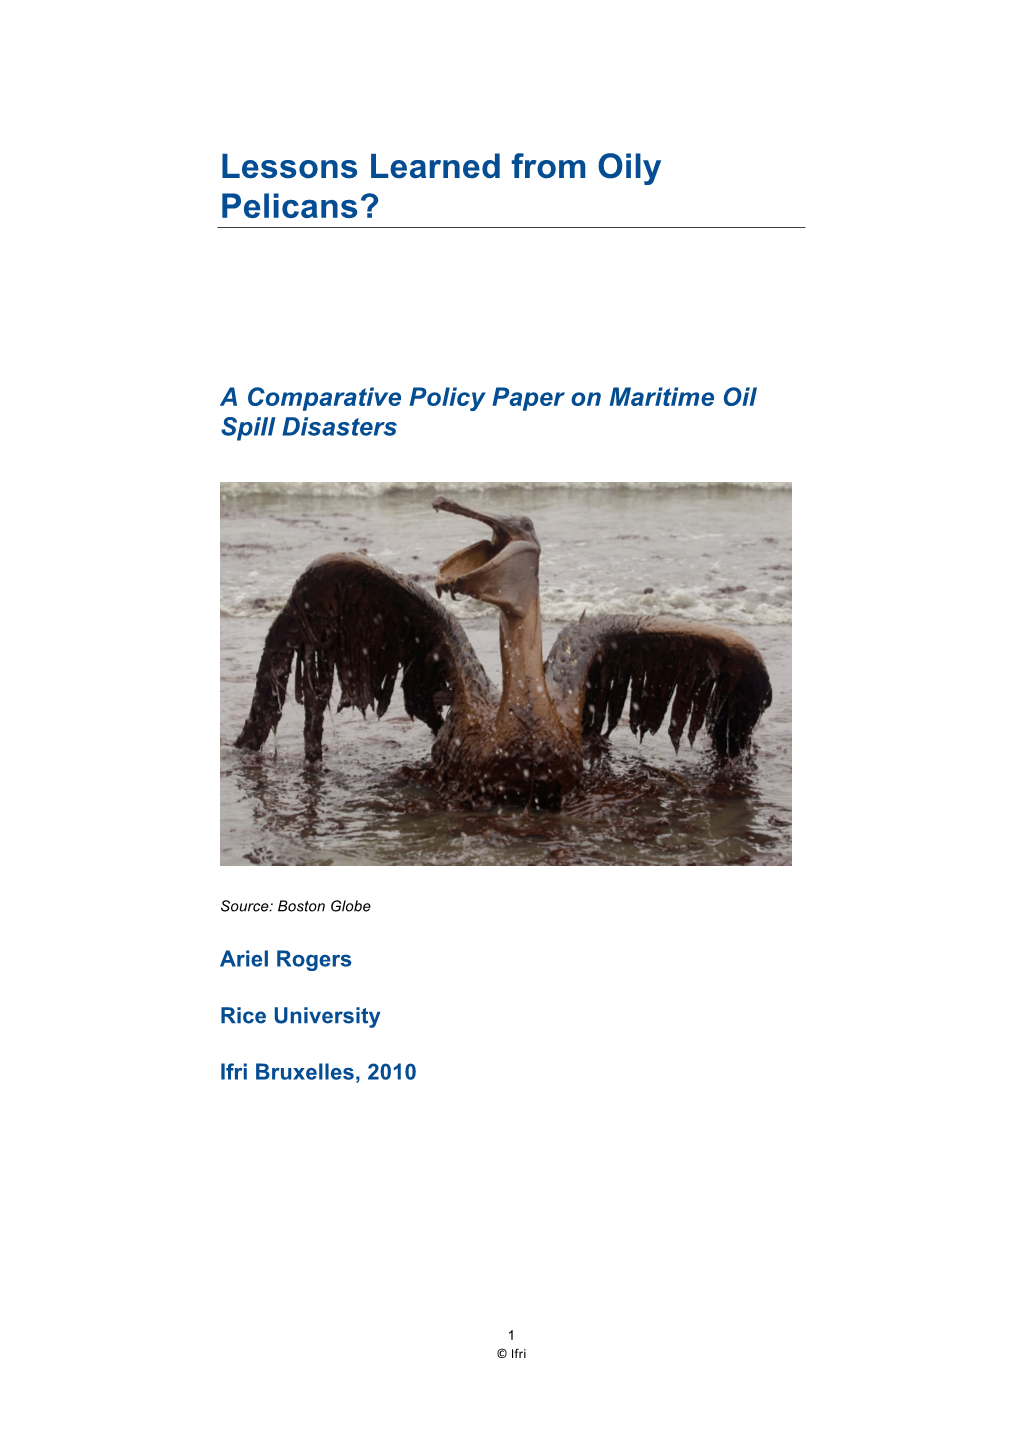 Lessons Learned from Oily Pelicans?